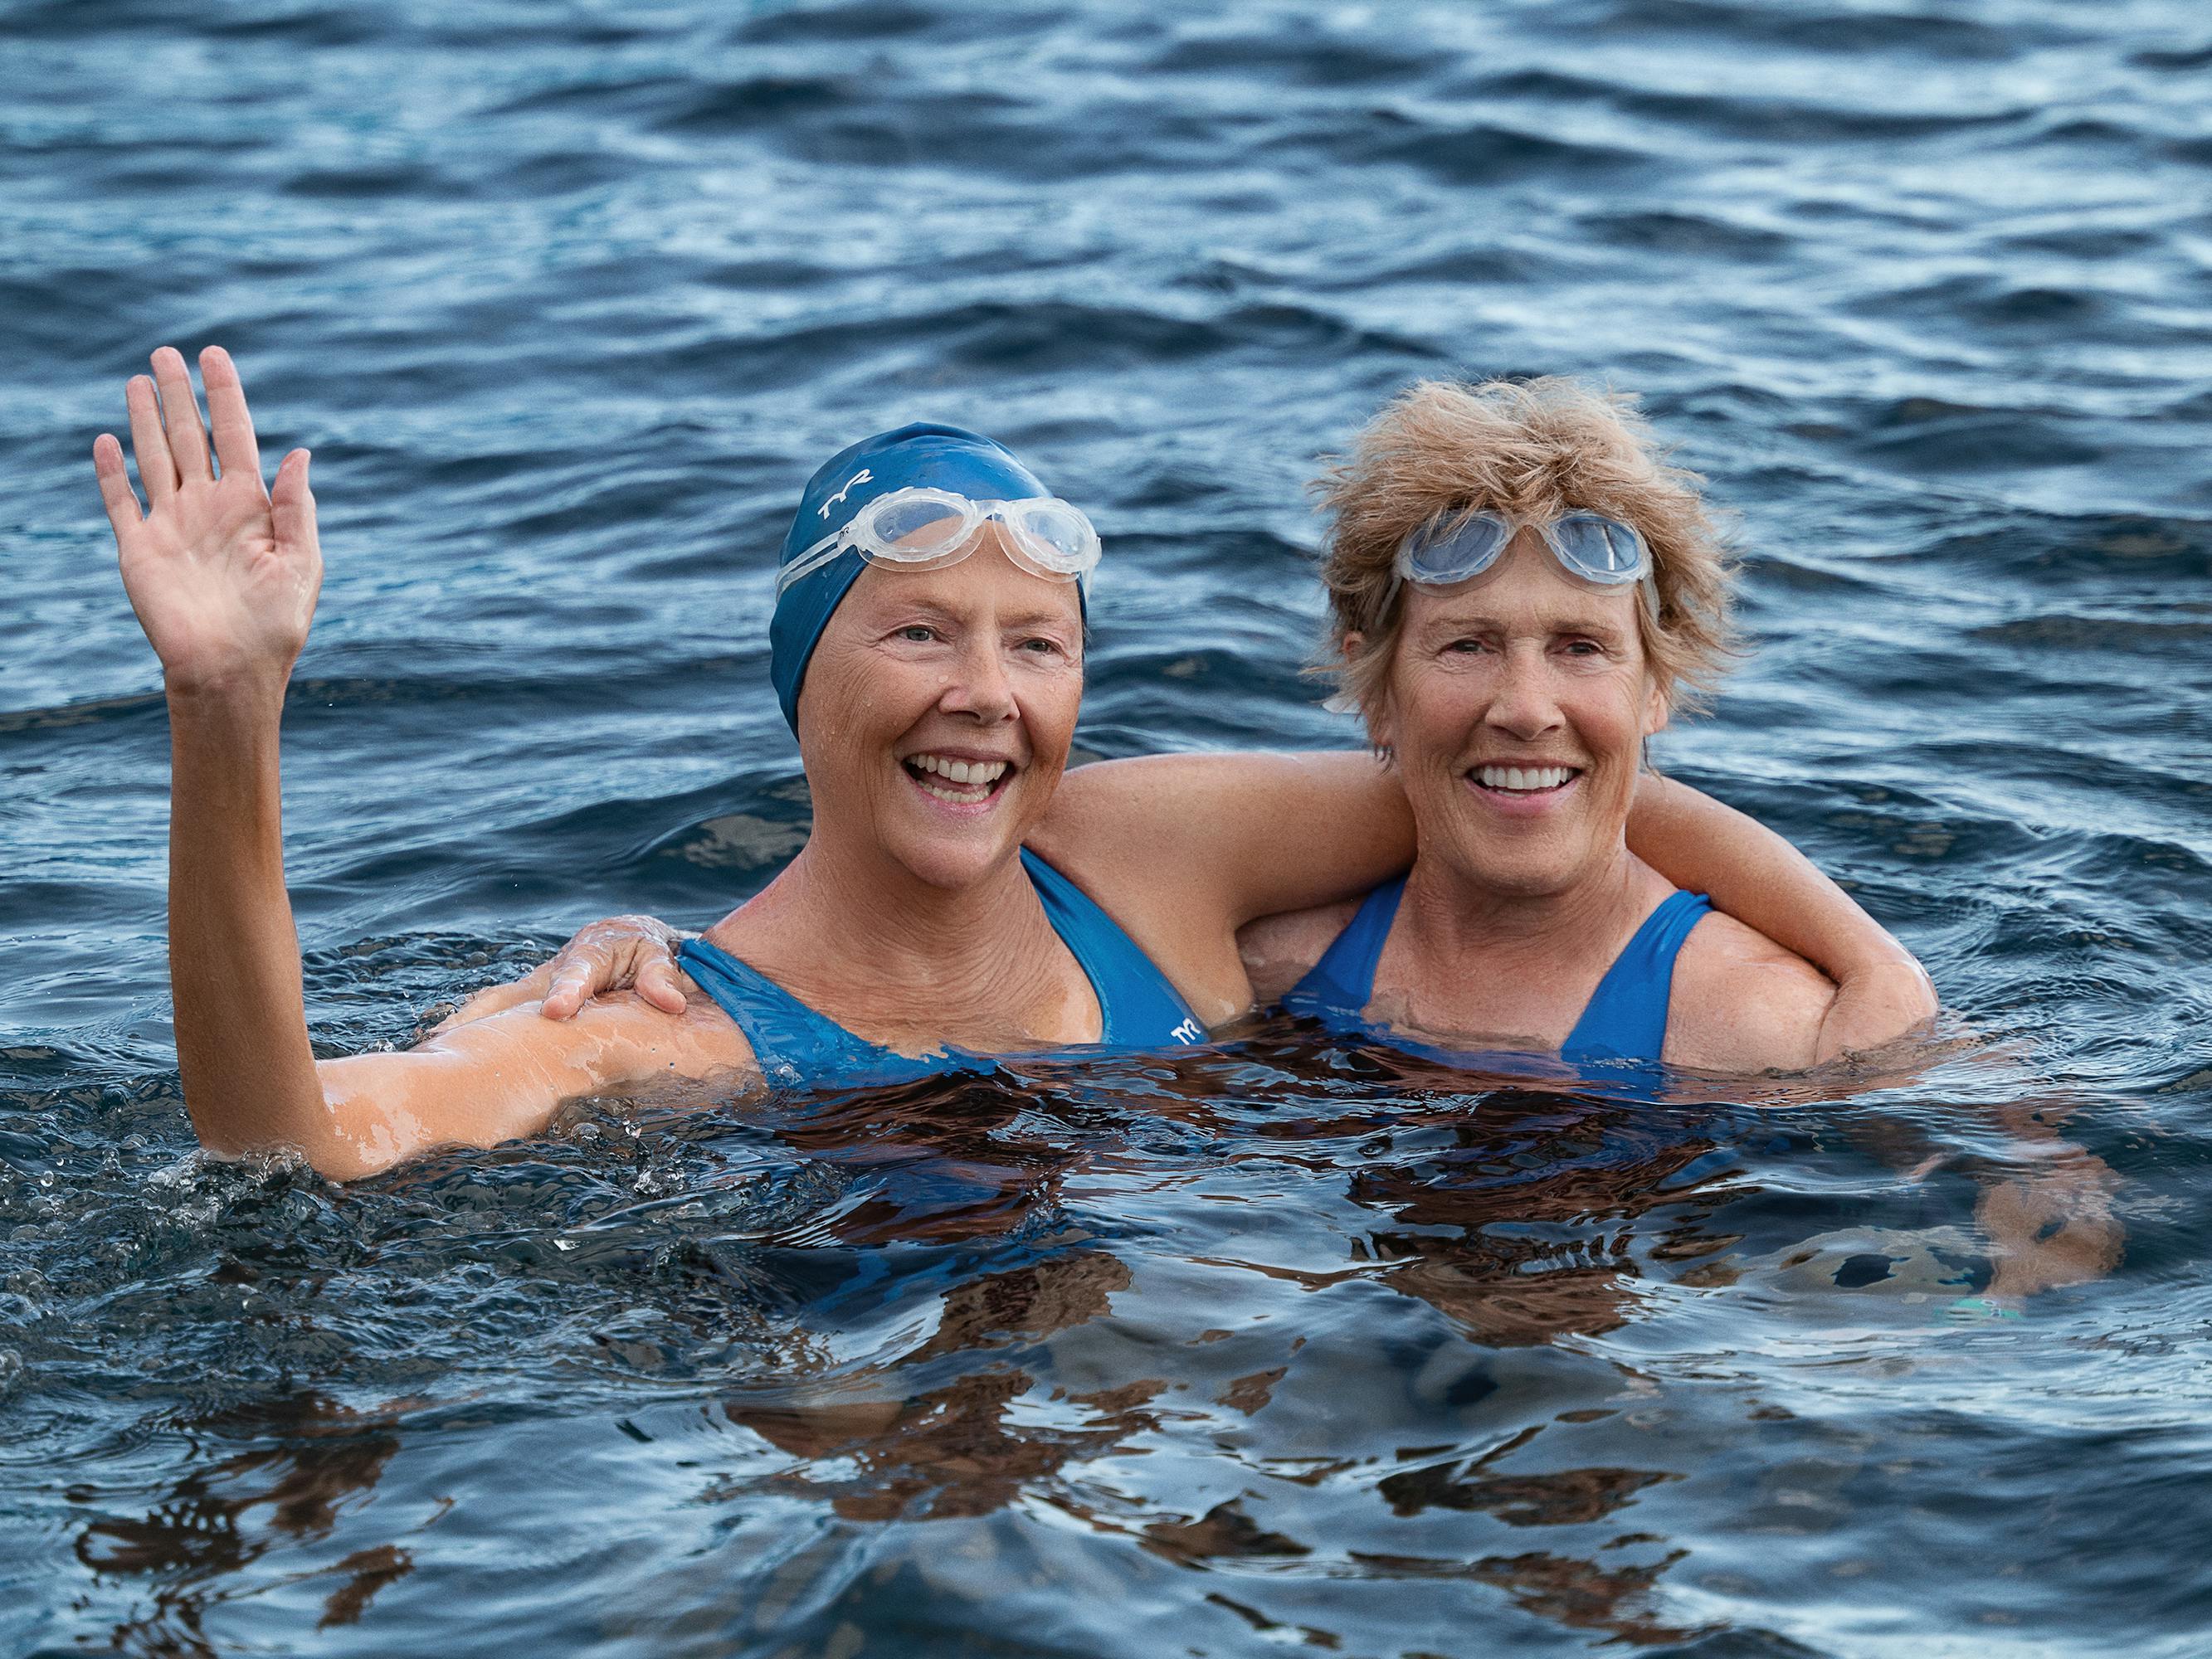 Annette Bening and Diana Nyad tread water and wear matching blue bathing suits and goggles.